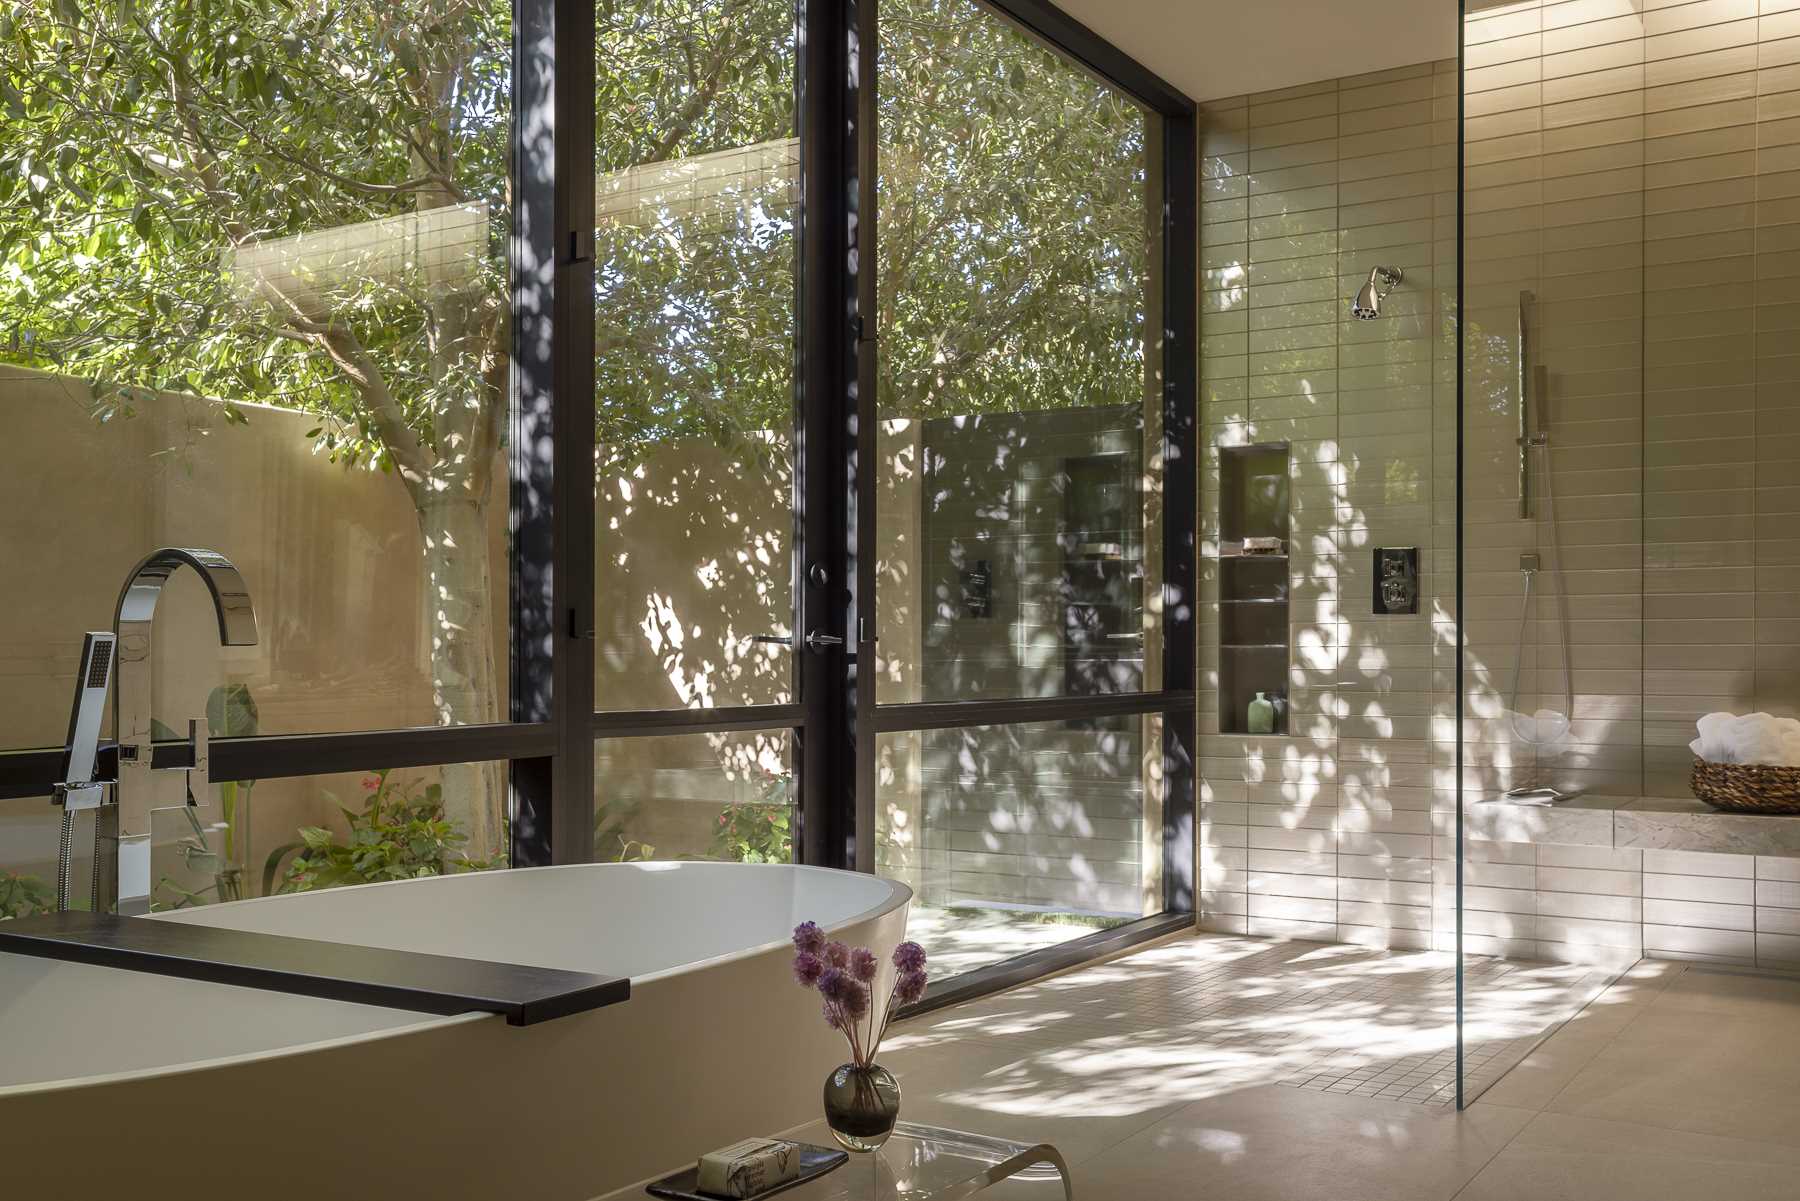 In a bathroom, skylights provide natural light, while the windows frame the tree views from the bath and the s،wer.